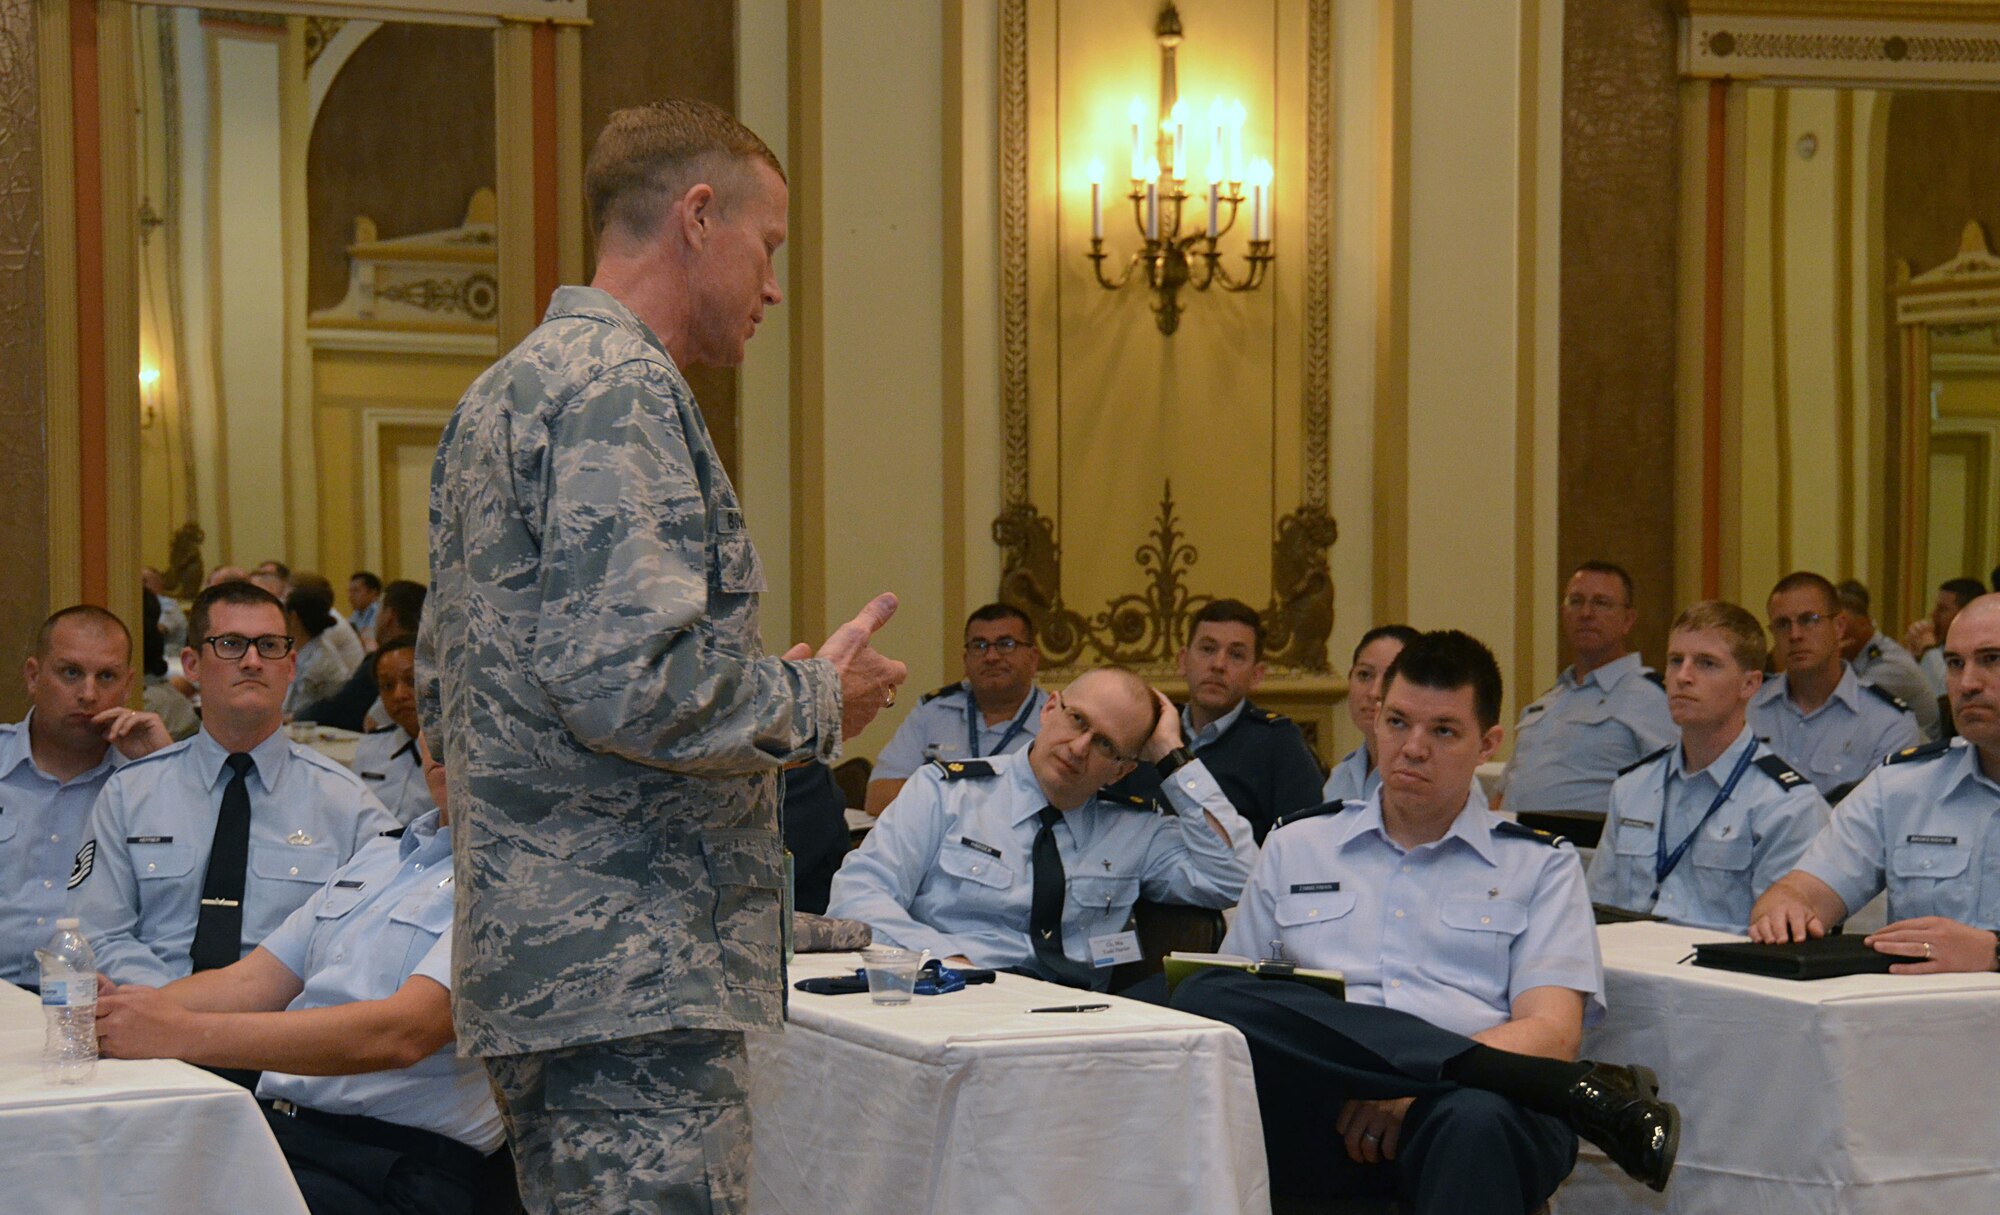 Over 270 Air Force Reserve Chaplain's and Chaplain Assistants were in attendance of the 2016 Air Force Reserve Chaplain Corps Conference held in Chicago, IL, April 2016. Over 20-hours of training was accomplished with guest speakers who specialize in Moral Injury and Soul Care. (U.S. Air Force photo/Tech. Sgt. Kelly Goonan)